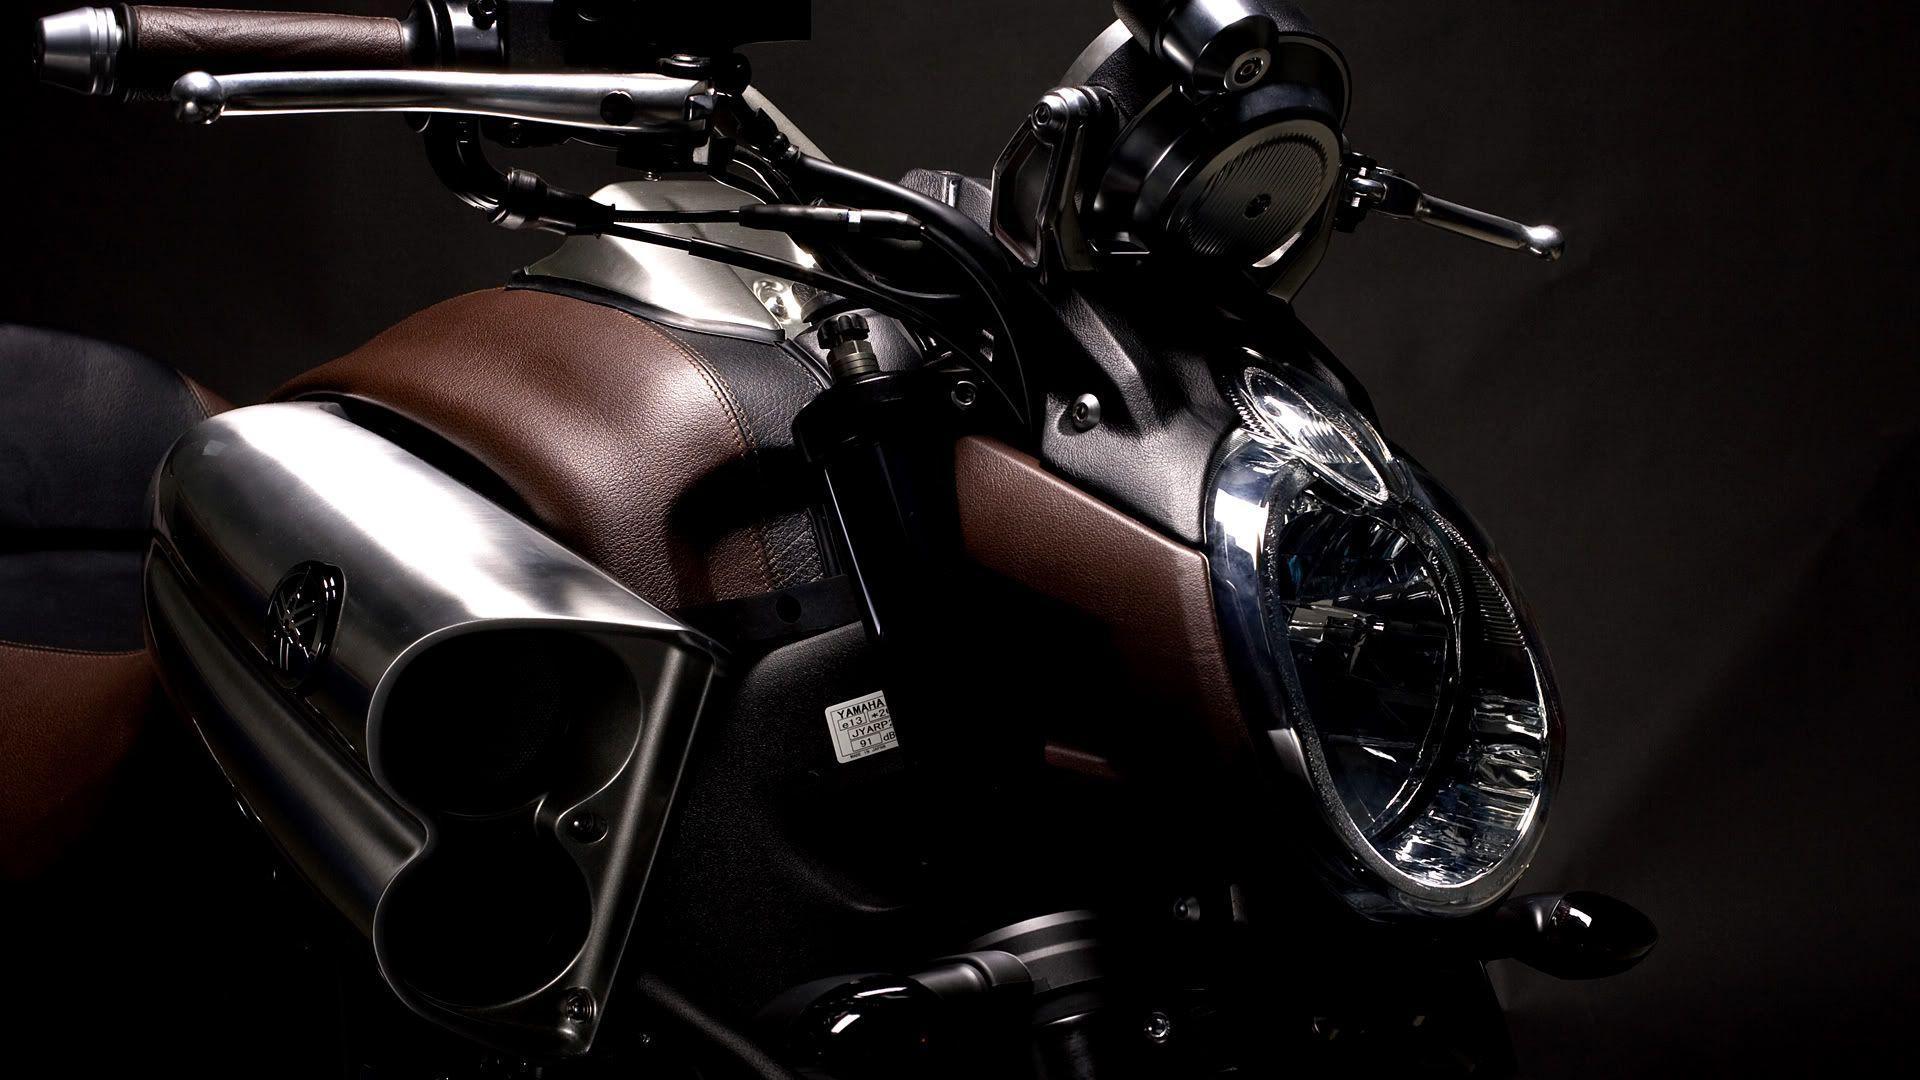 Yamaha Vmax Hermes Motorcycle Wallpaper In HD, HQ Background